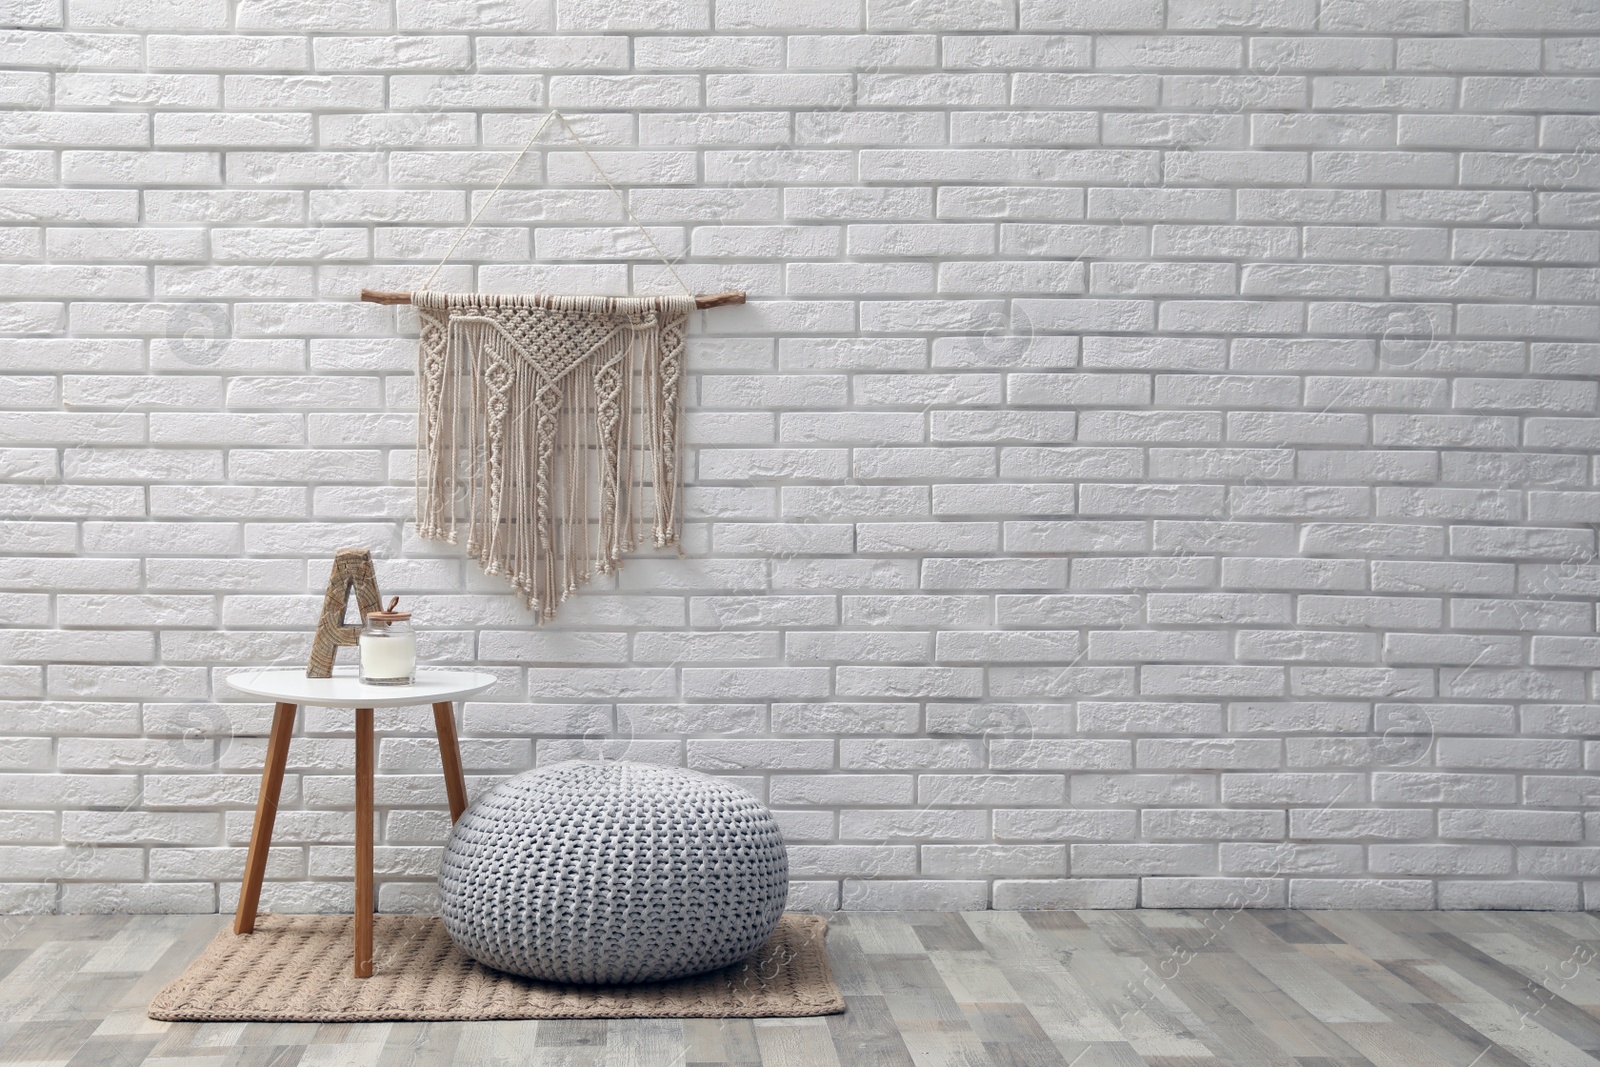 Photo of Comfortable knitted pouf, table and decor elements near white brick wall indoors, space for text. Interior design